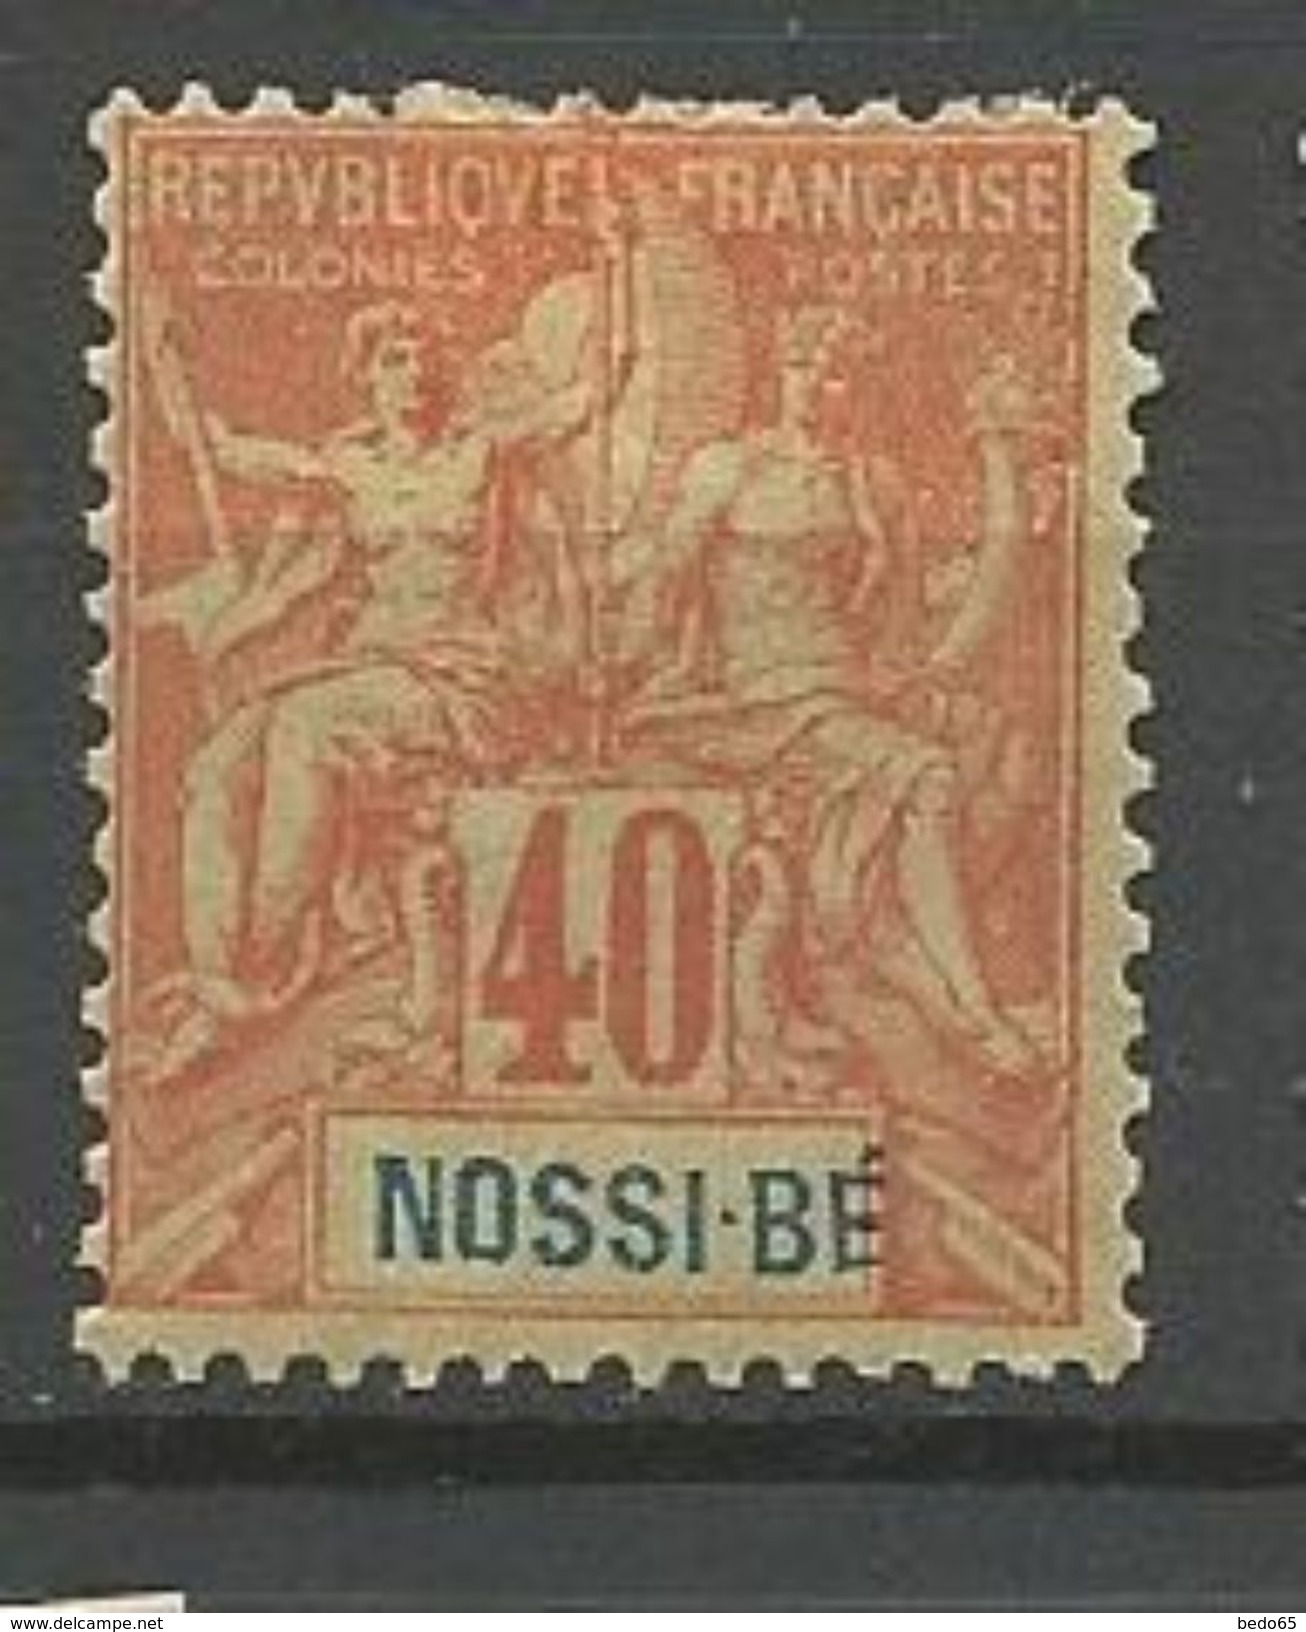 NOSSI-BE YVERT N° 36 NEUF* CHARNIERE TB / MH - Unused Stamps